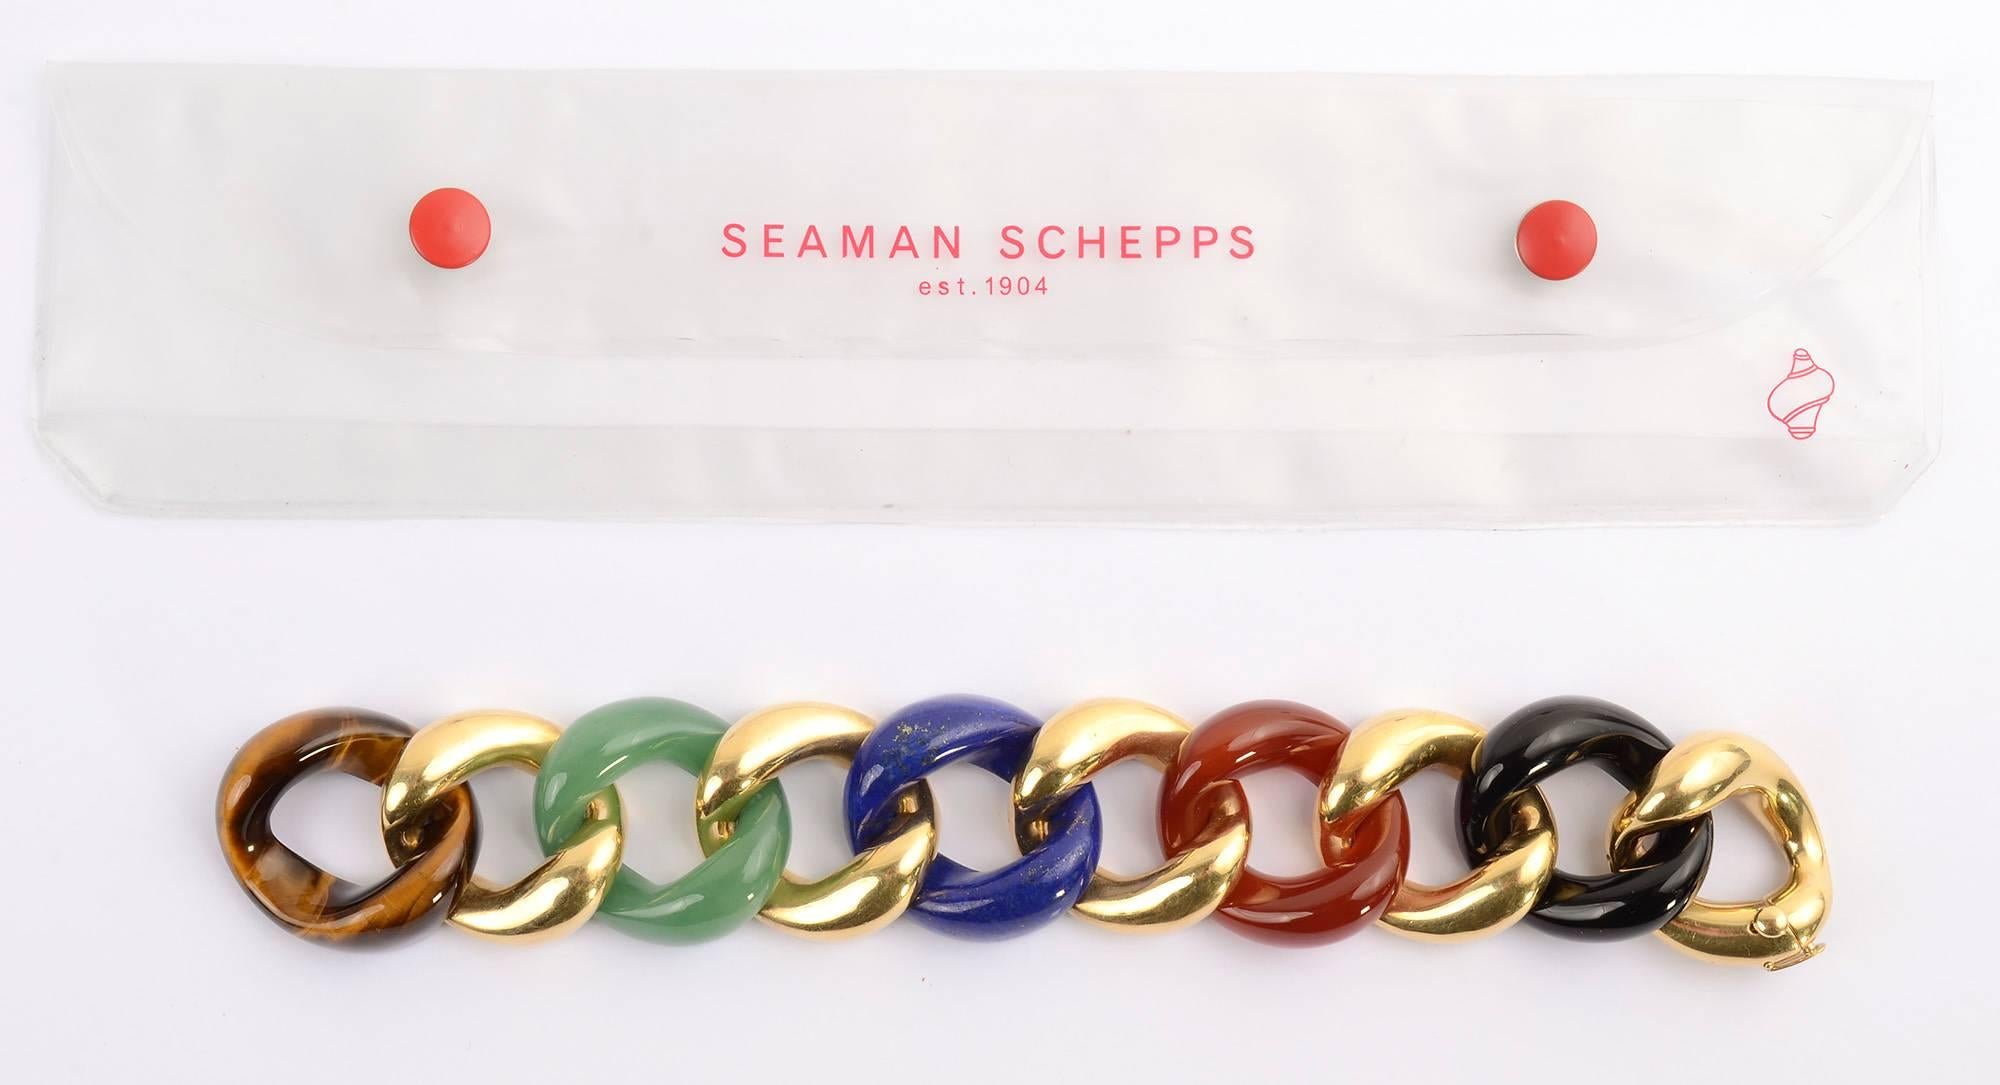 Seaman Schepps Classic Curbchain Link bracelet in which links of 18 karat gold alternate with black onyx; carnelian; lapis lazuli; jade and tiger's eye. The bracelet comes in two sizes - this is the larger one. It measures 7 3/4 inches long and 1